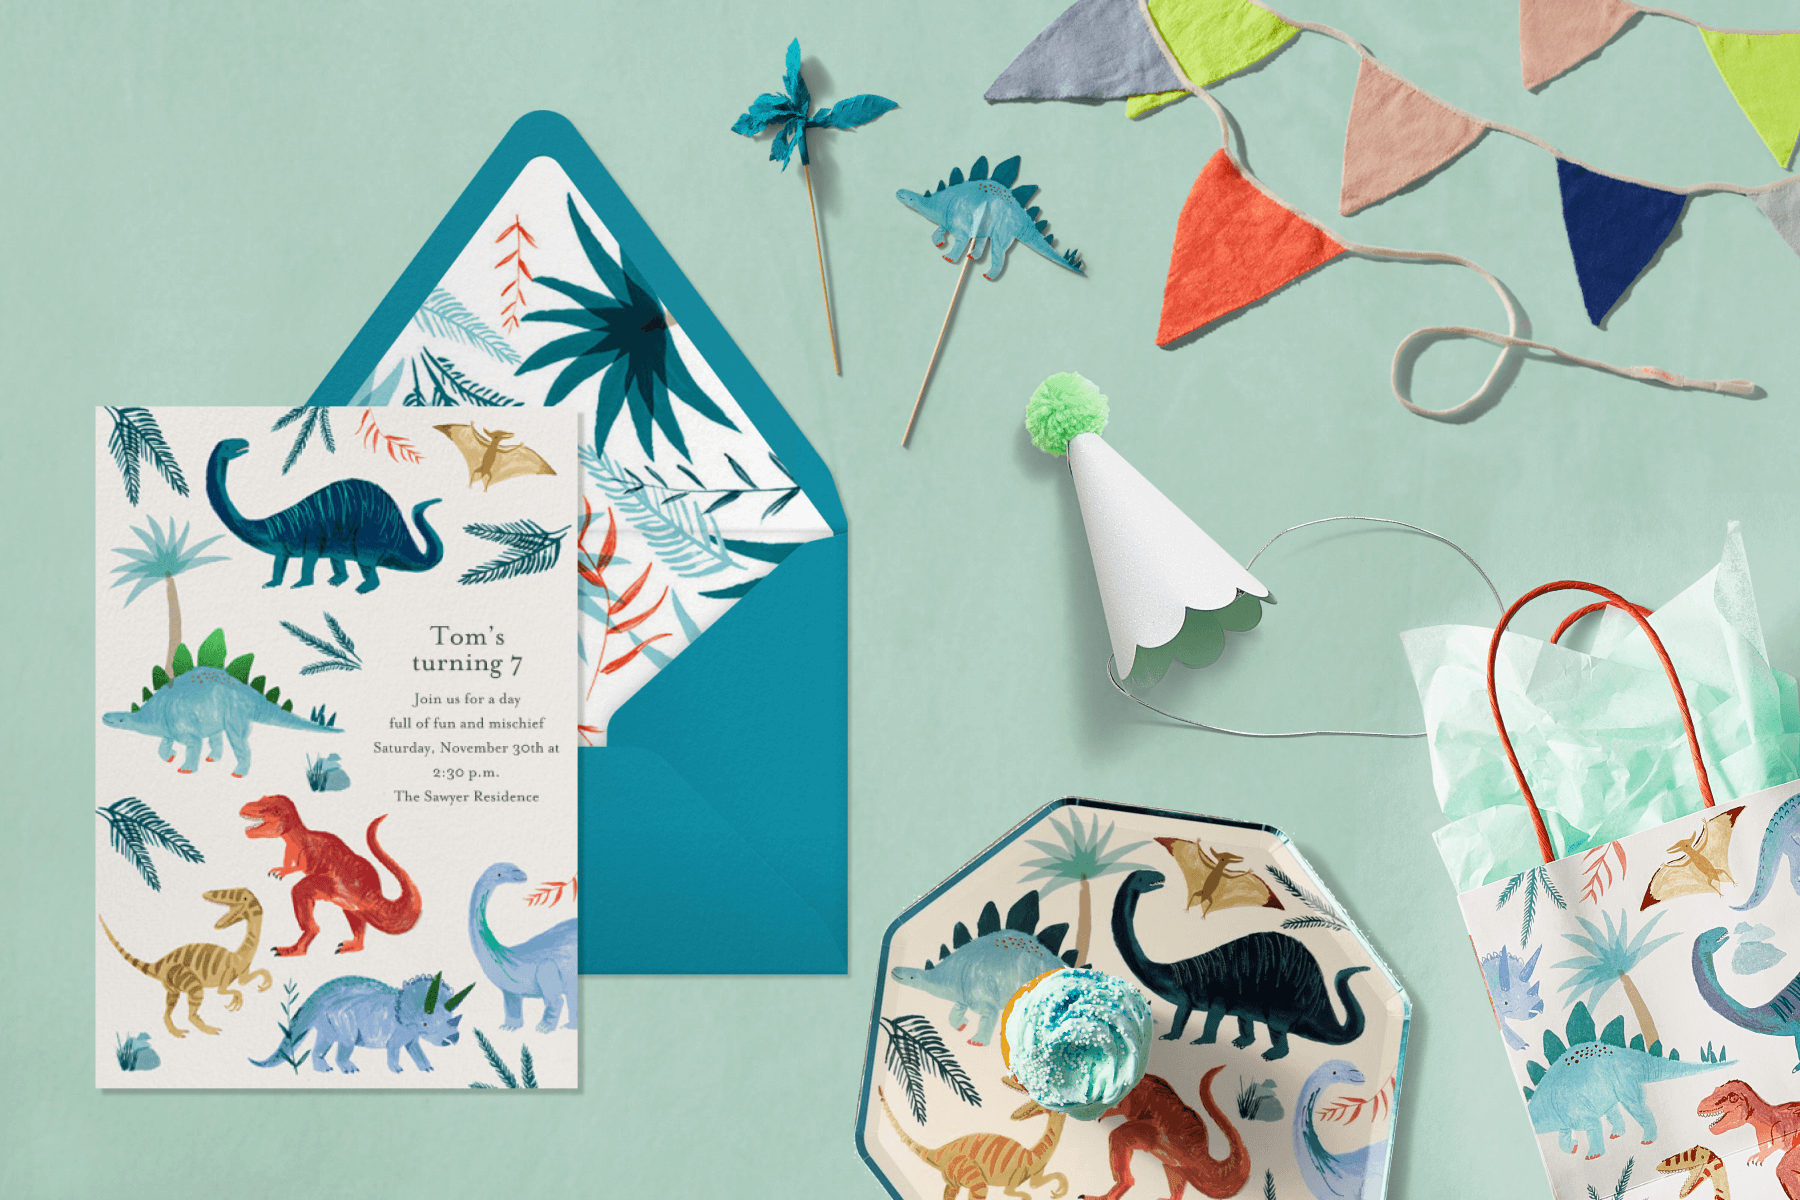 Dinosaur-themed invitation and party supplies.